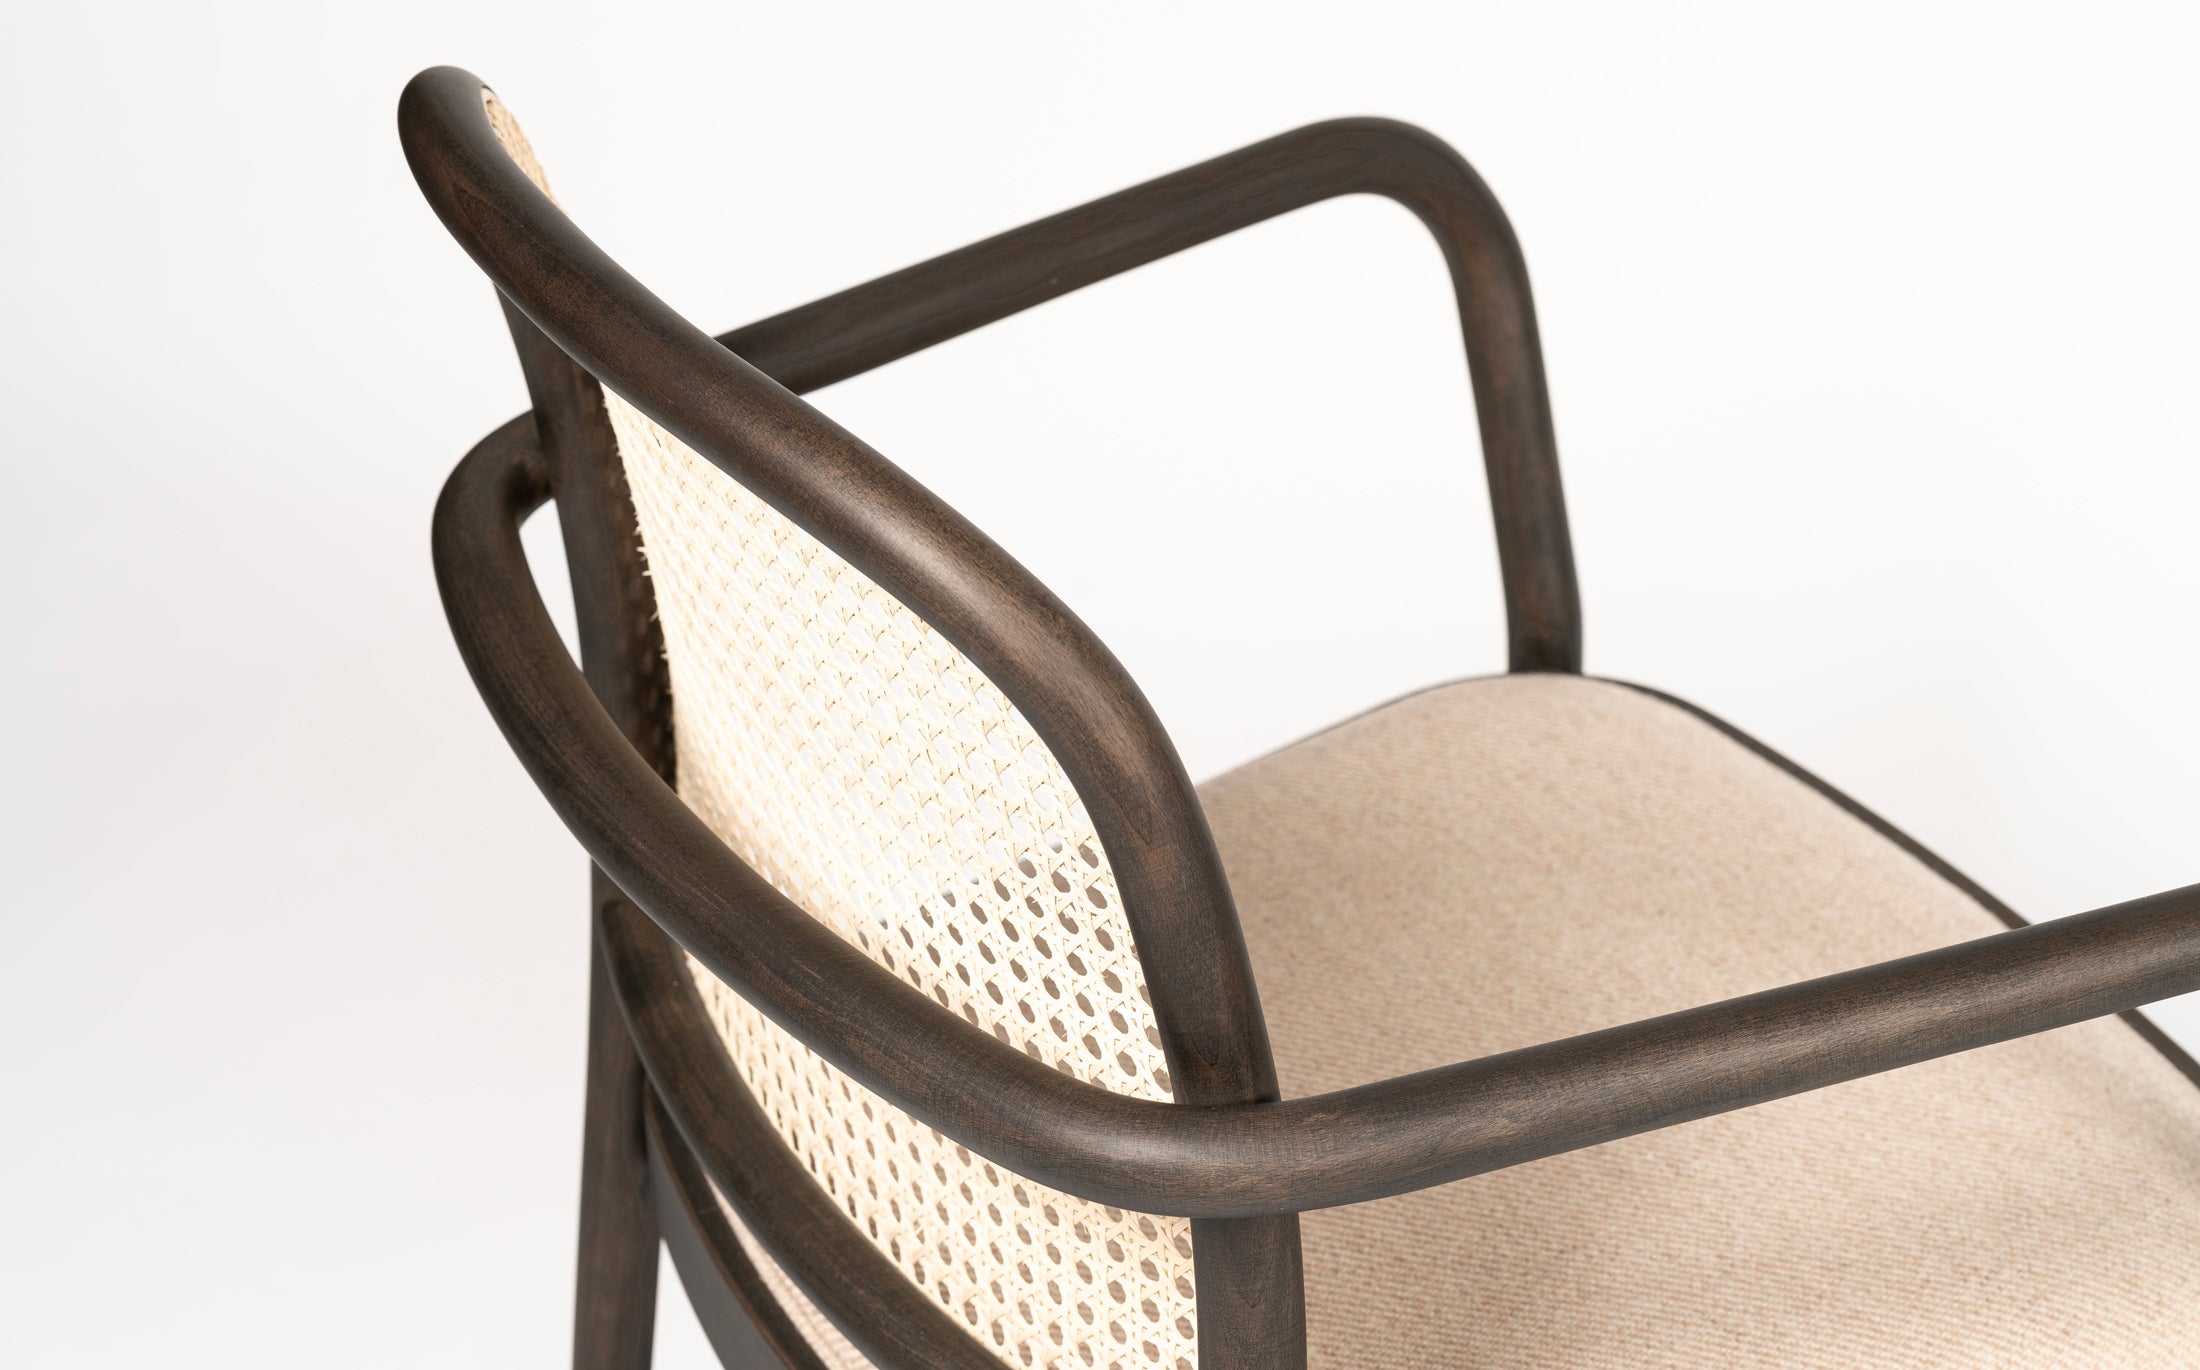 The bent armchair - Charcoal Grey